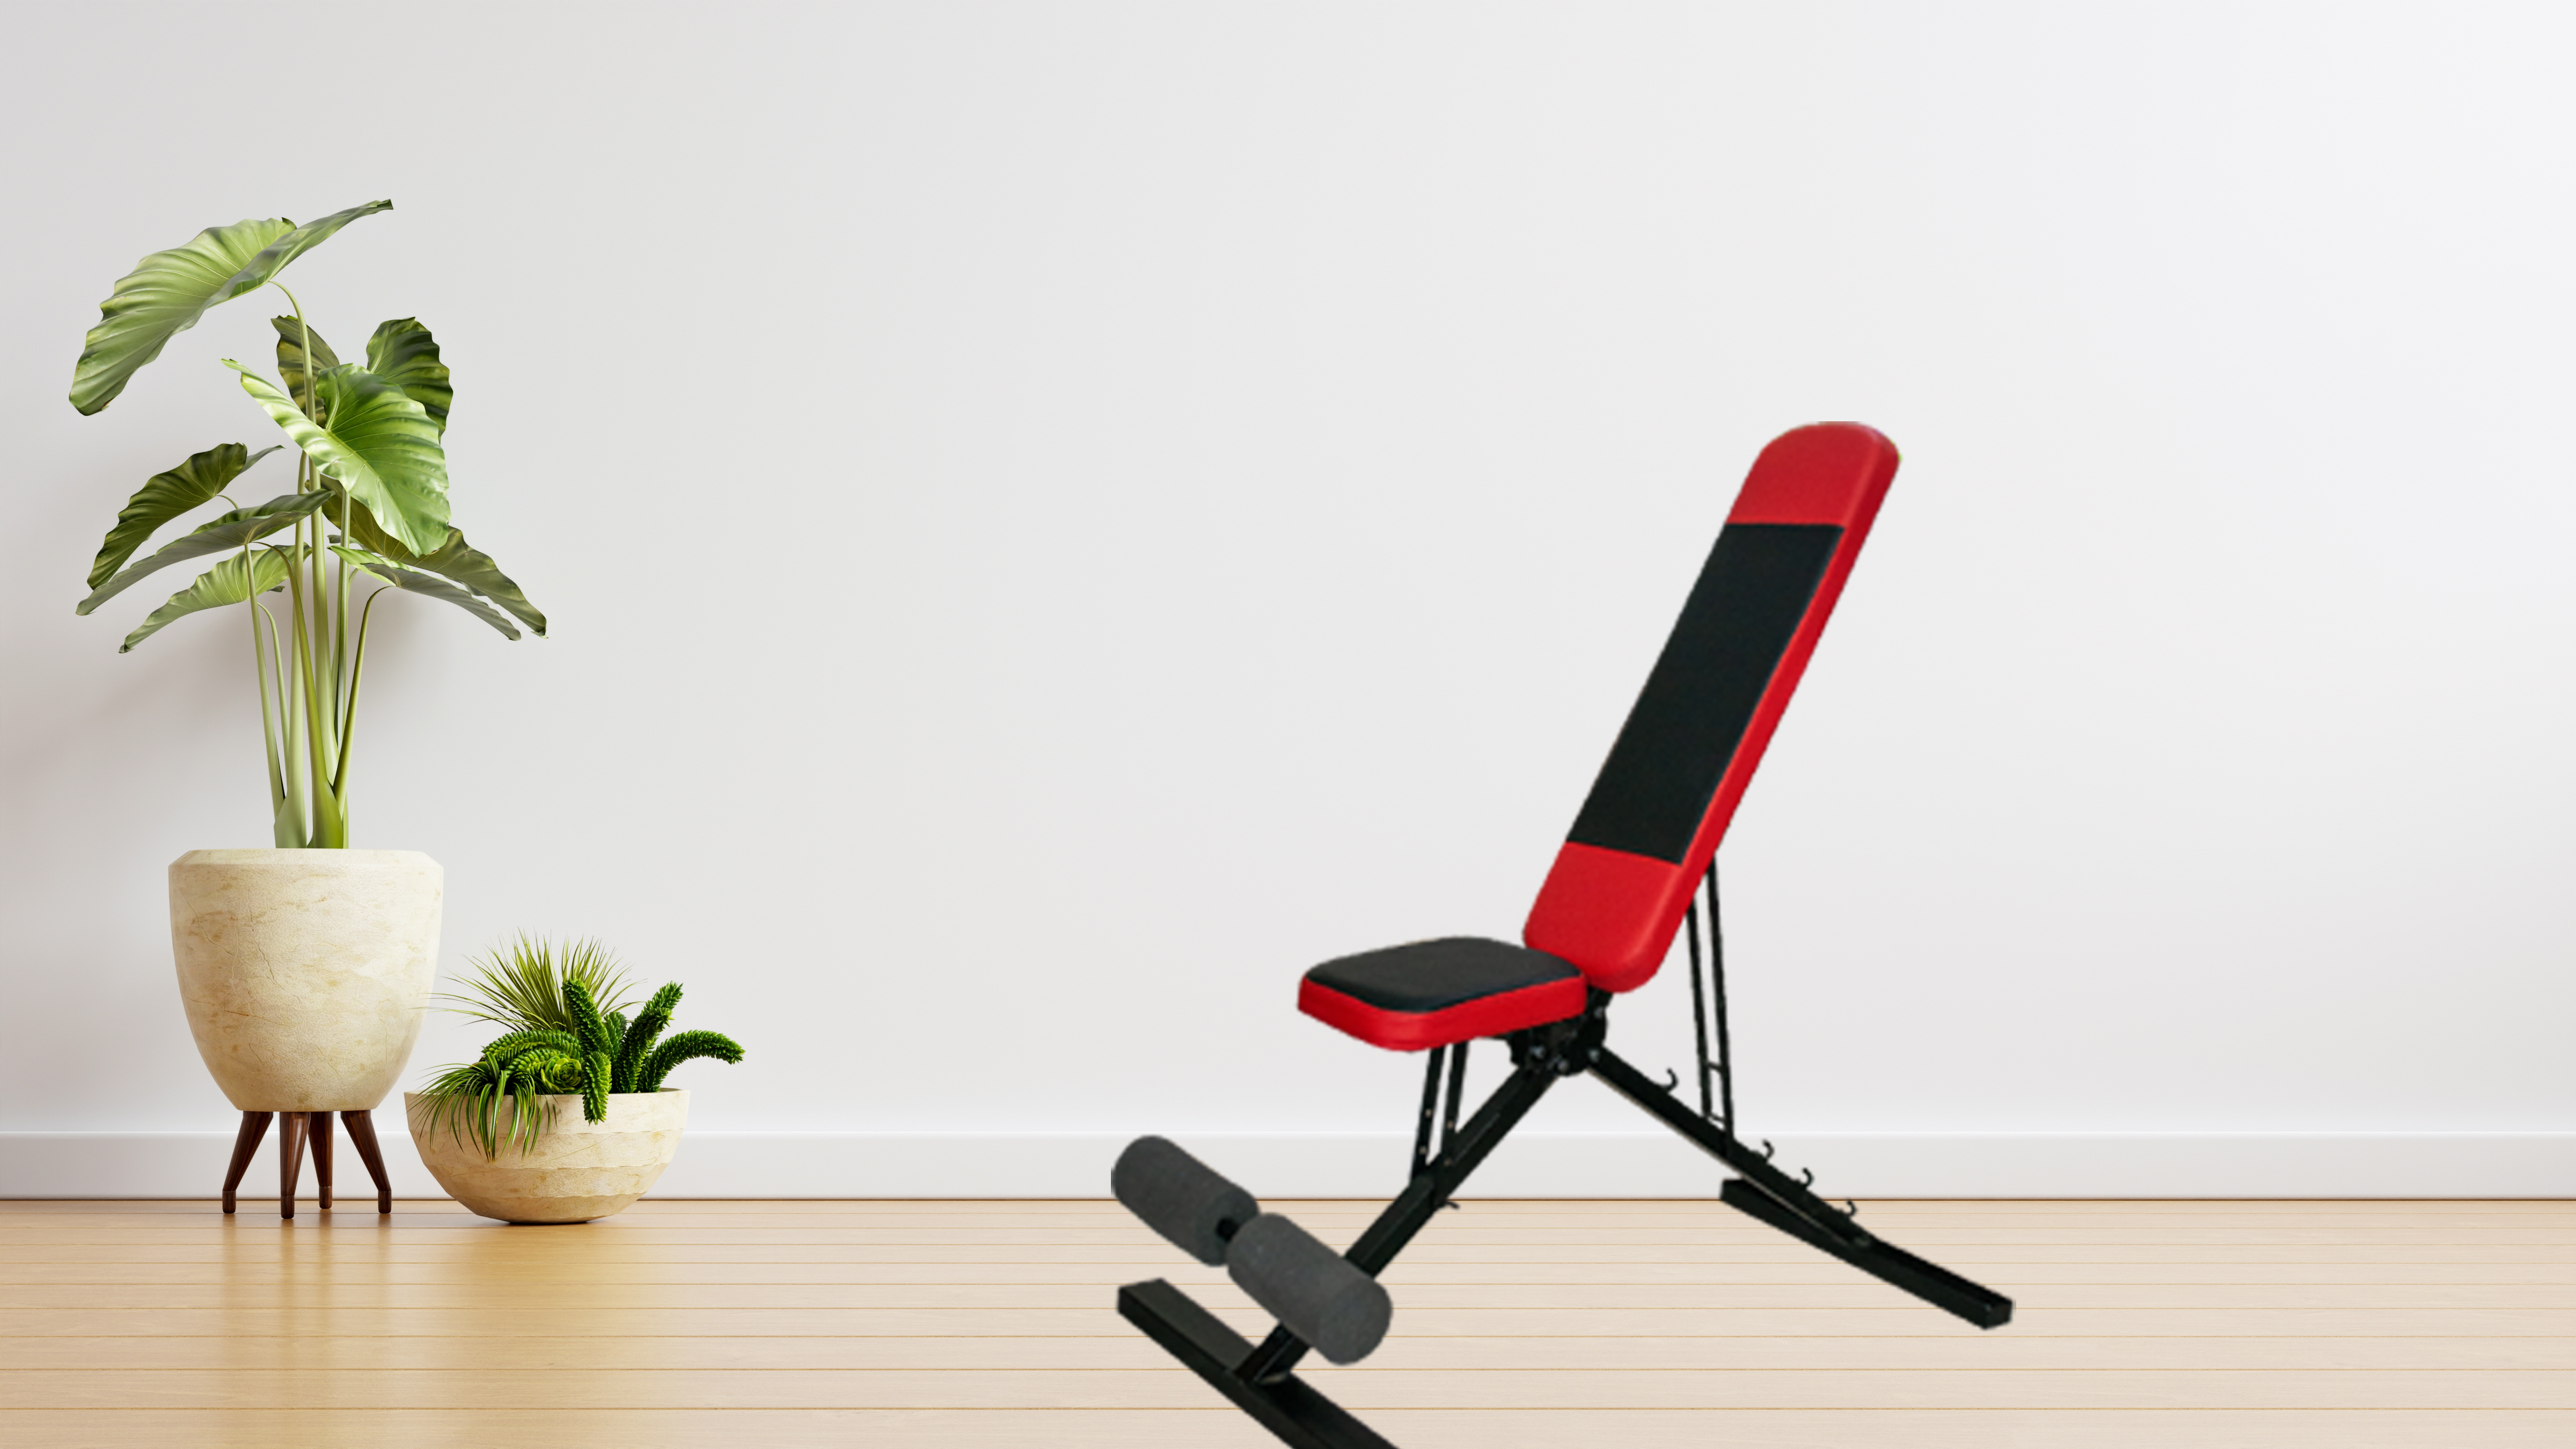 SPORTECH-Pro-Bench-Press-white-wall-empty-room-with-plants-floor-3d-rendering.png